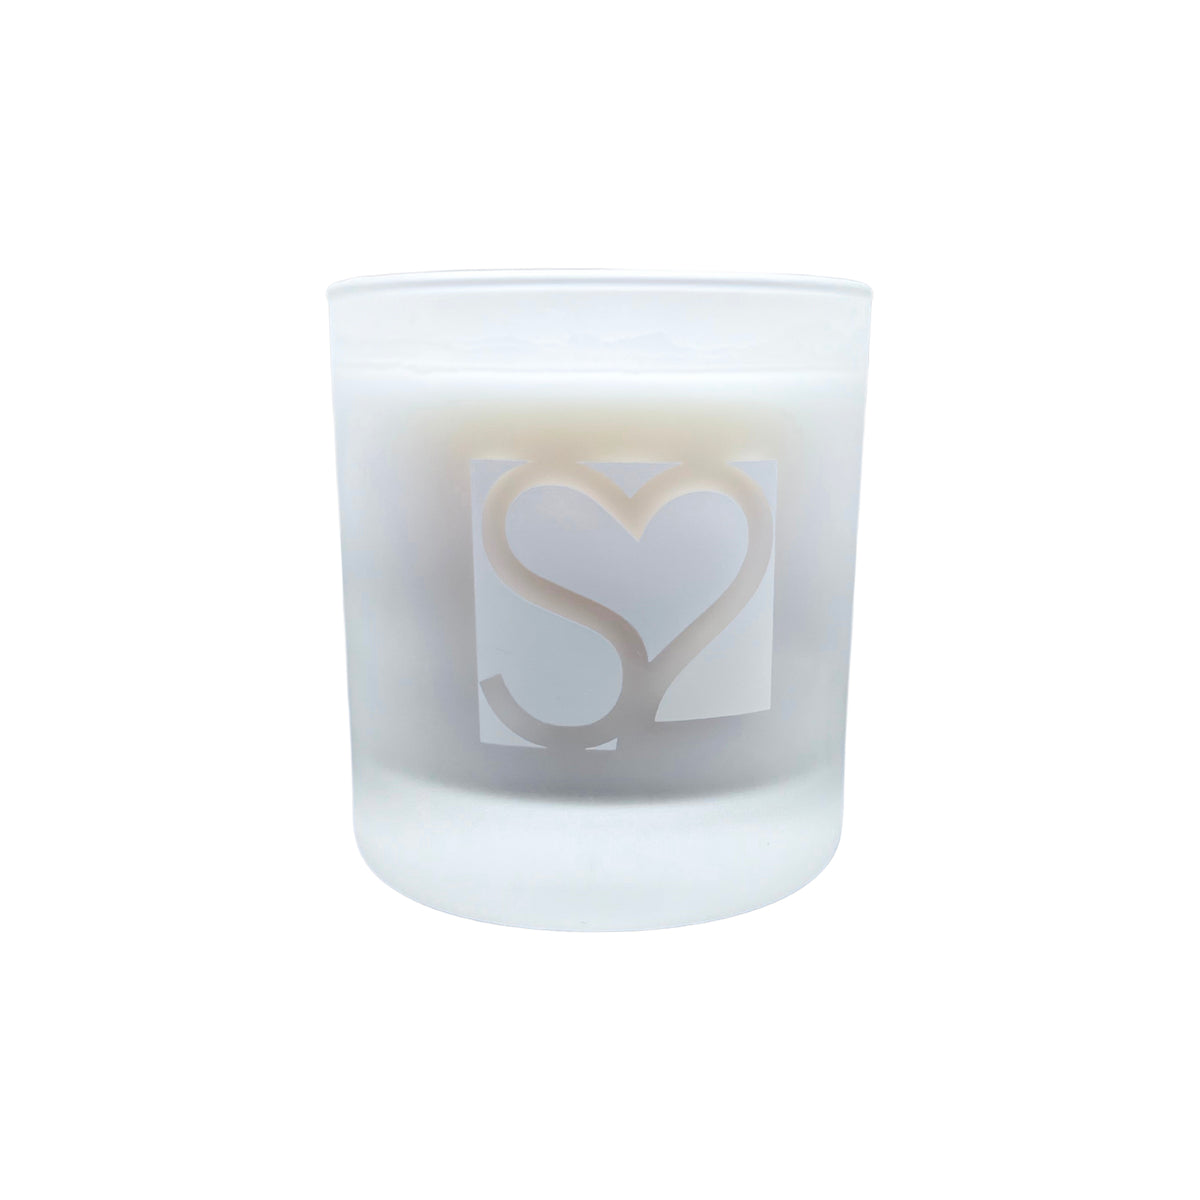 Suite201 Candle